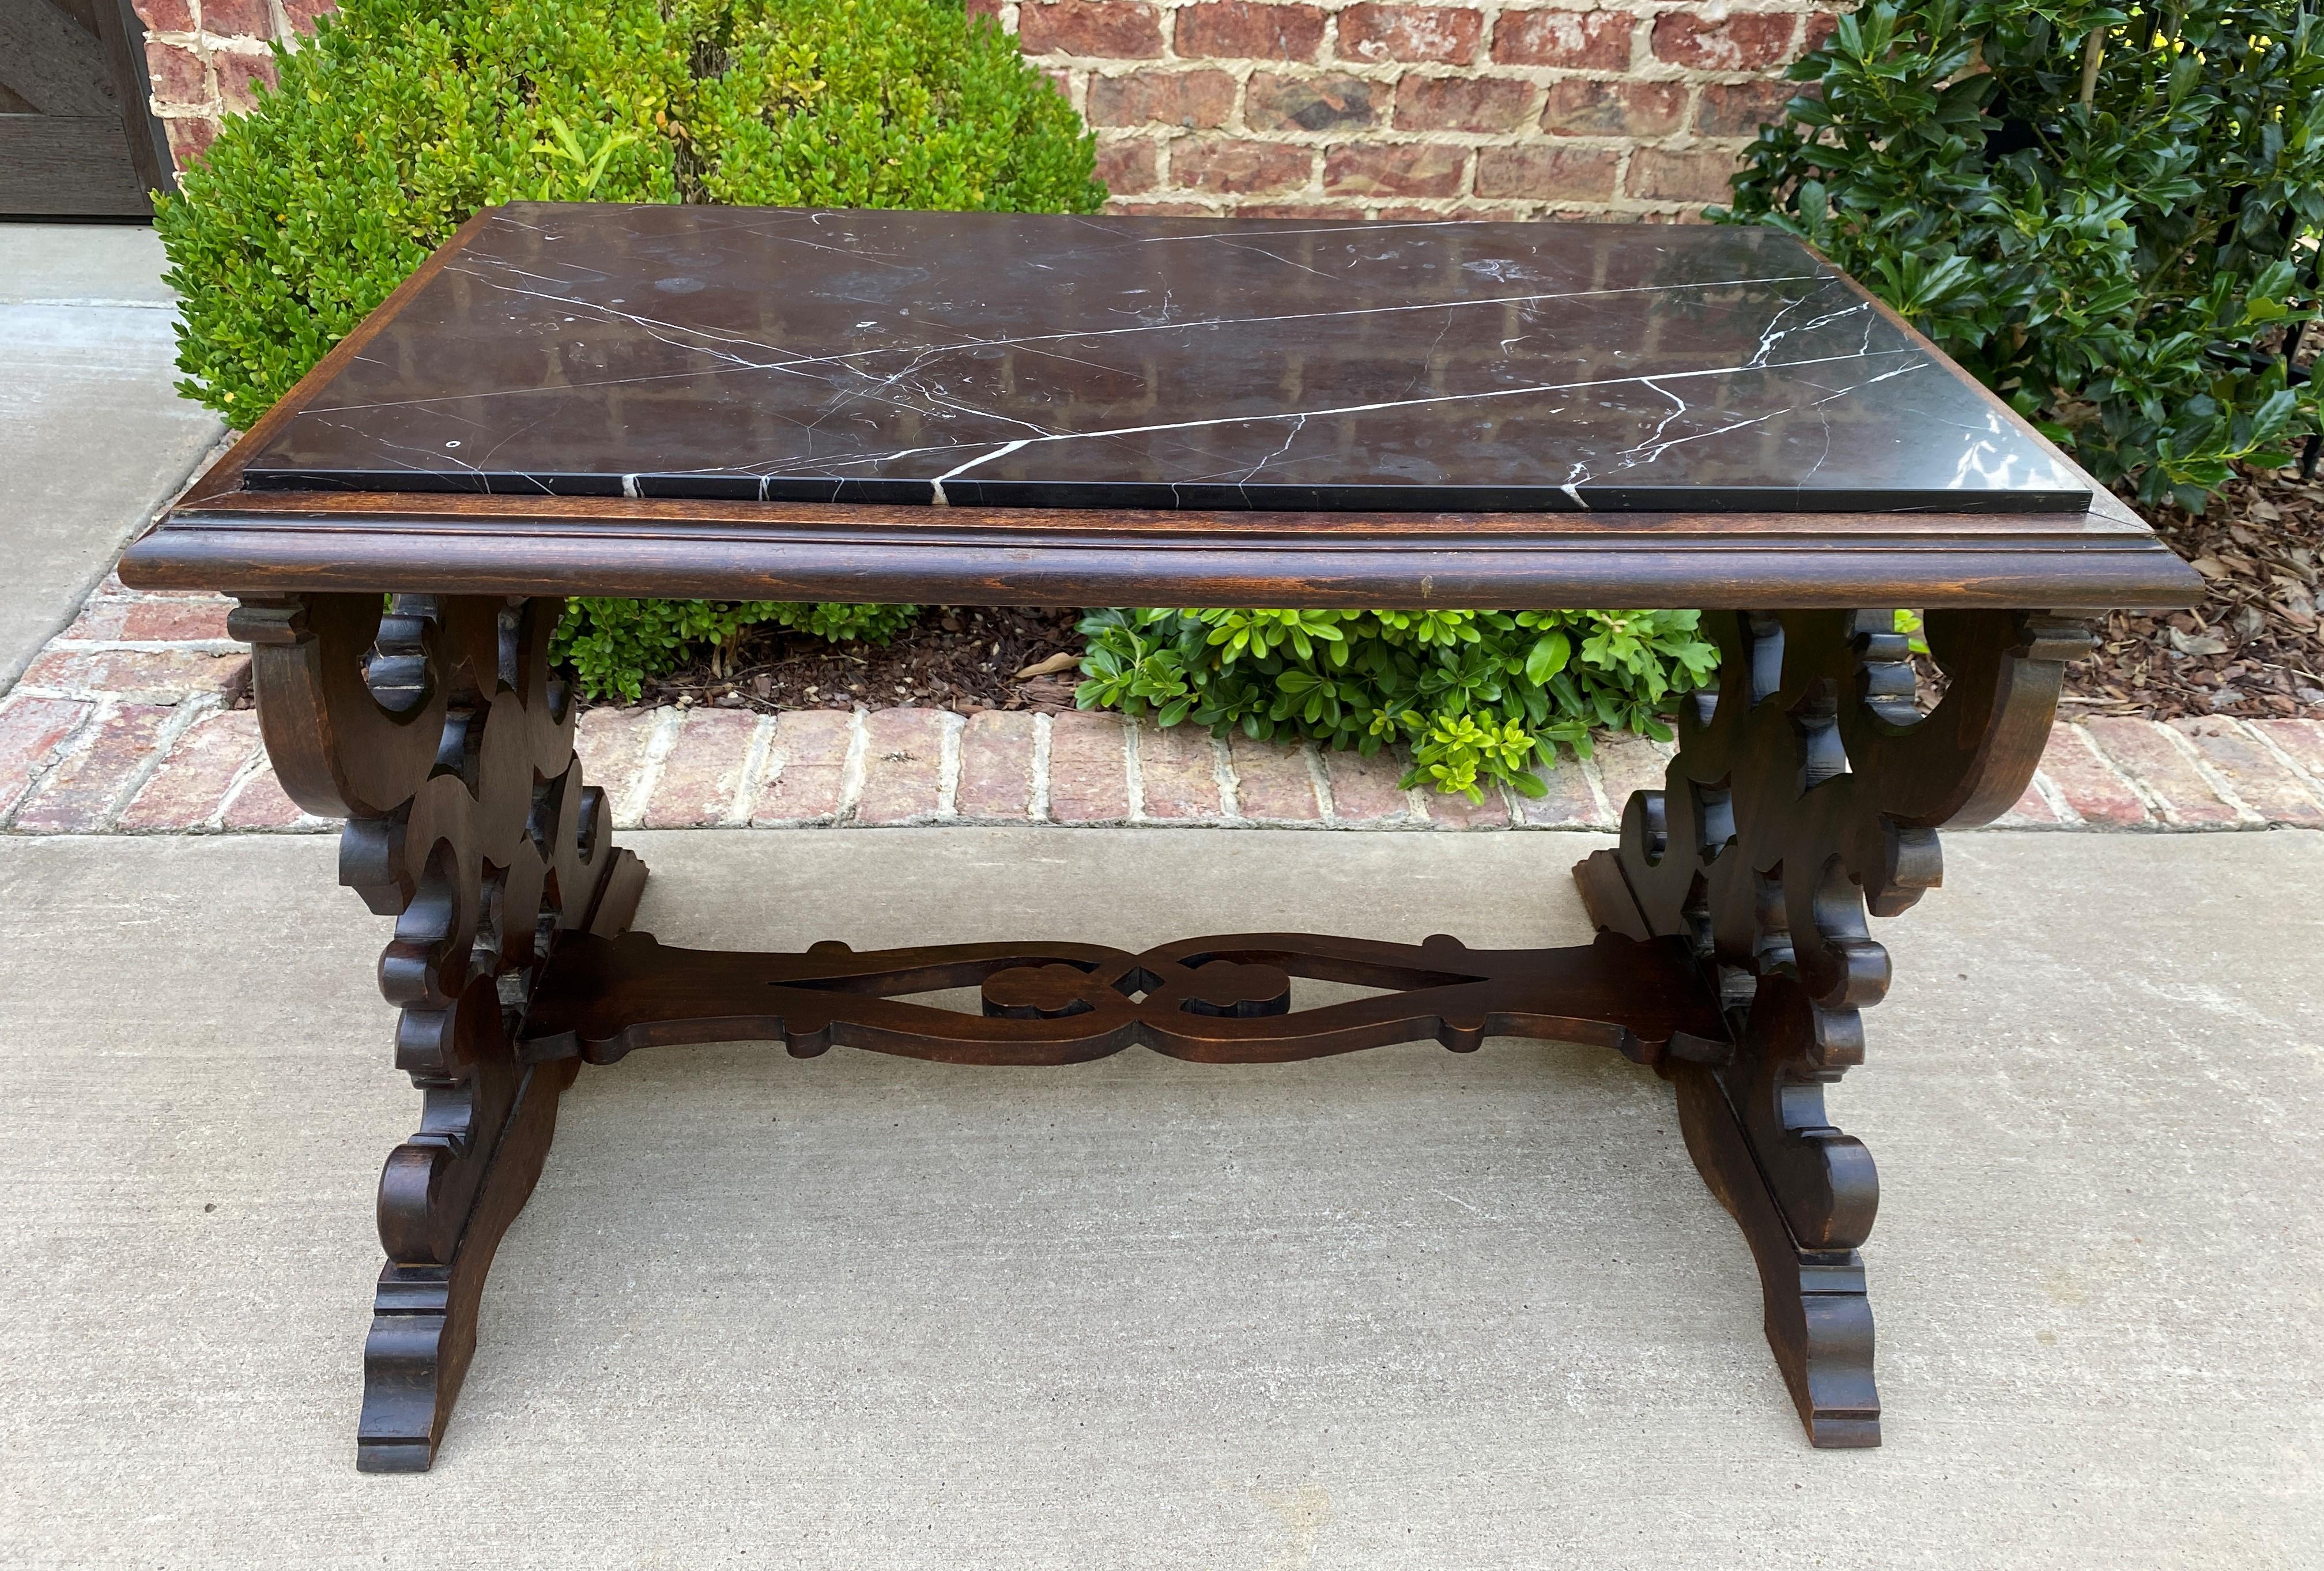 Antique French Renaissance Revival Coffee Table Bench Settee Marble Top Oak In Good Condition For Sale In Tyler, TX